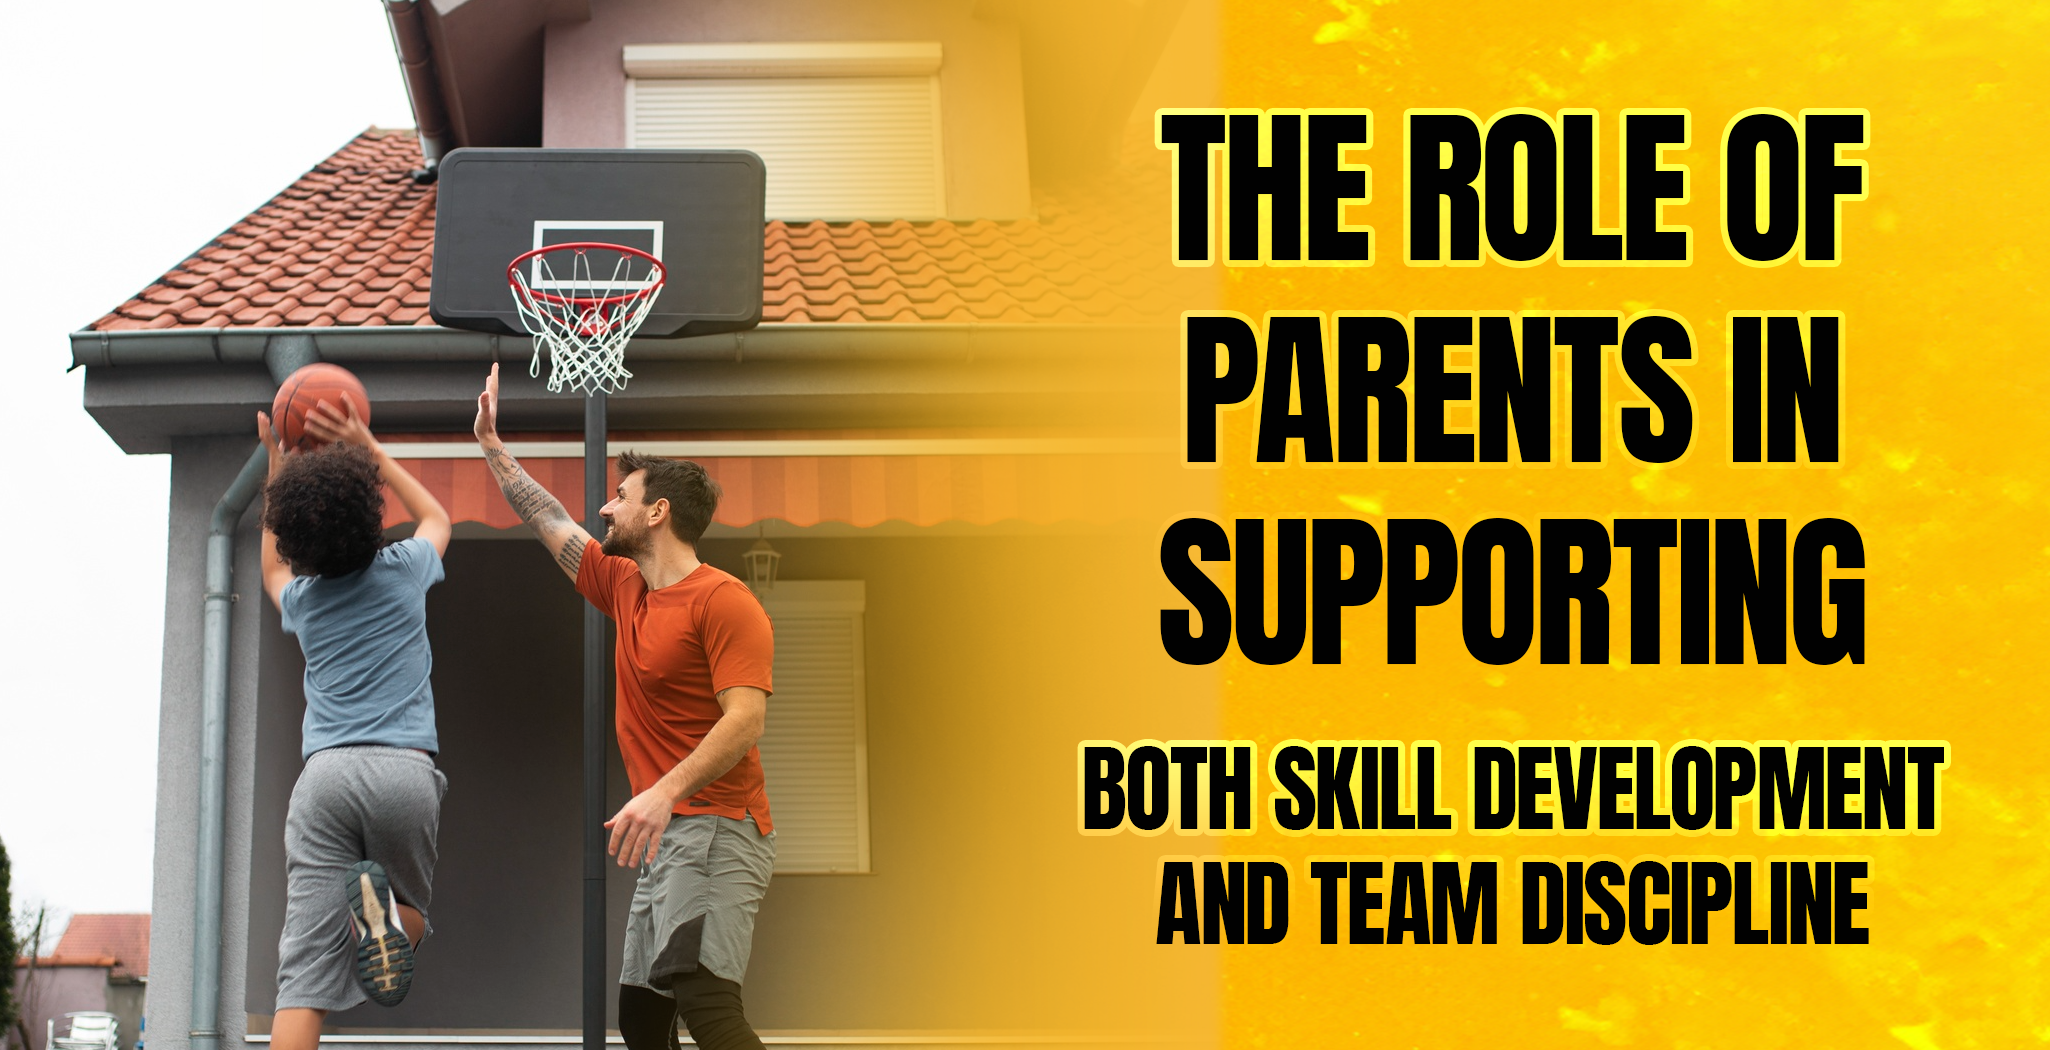 The Role of Parents in Supporting Both Skill Development and Team Discipline